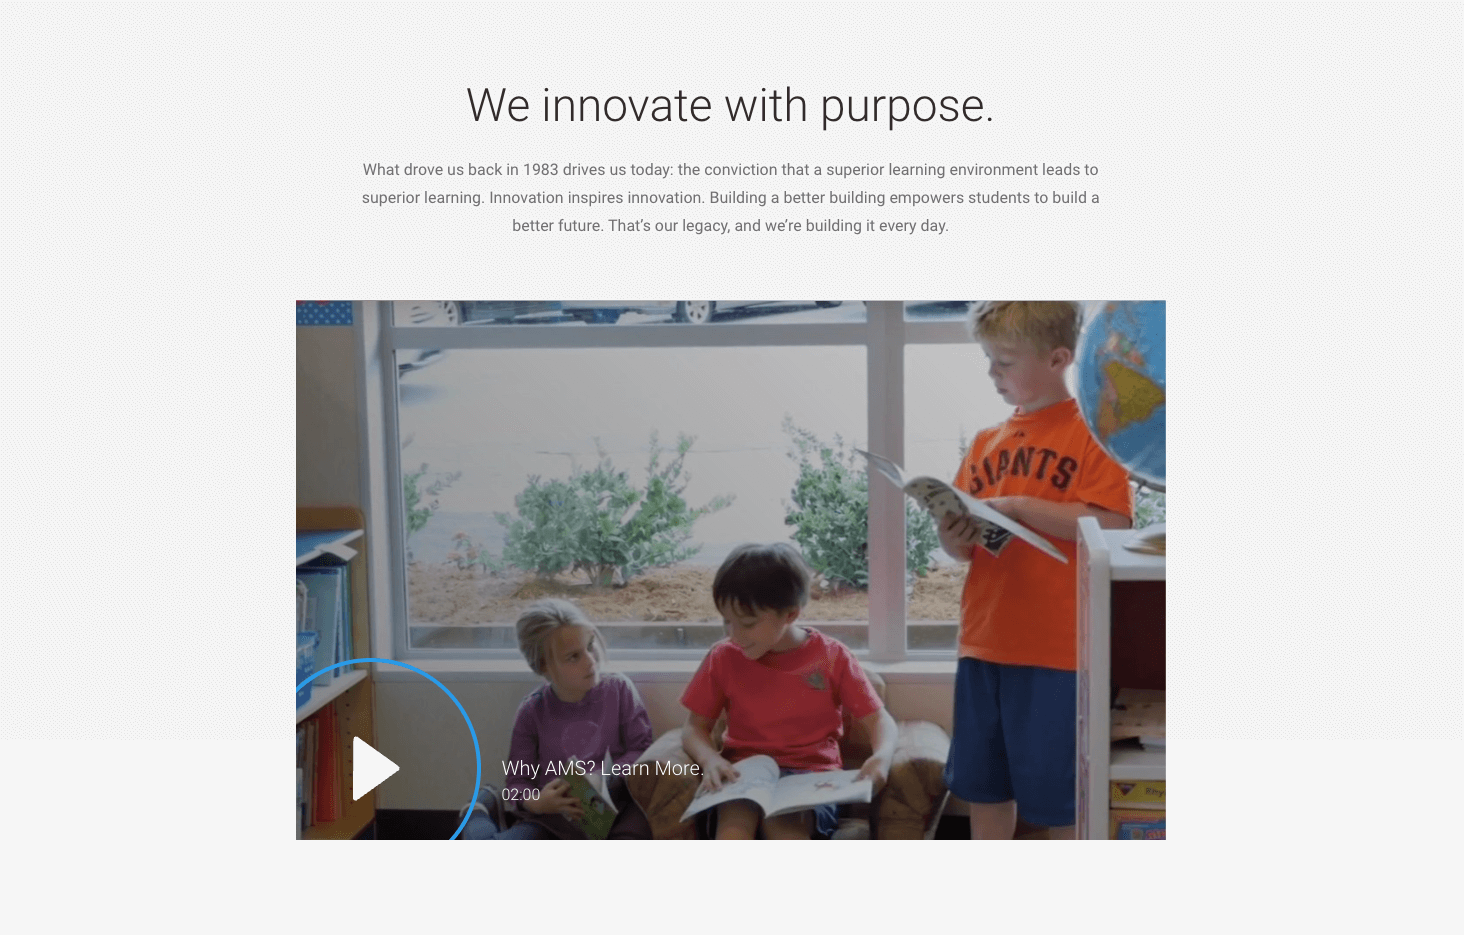 A screenshot of a manufacturing website with the headline “We innovate with purpose,” and an image of three preschool-age students in a classroom. There is a video play button over the image.”